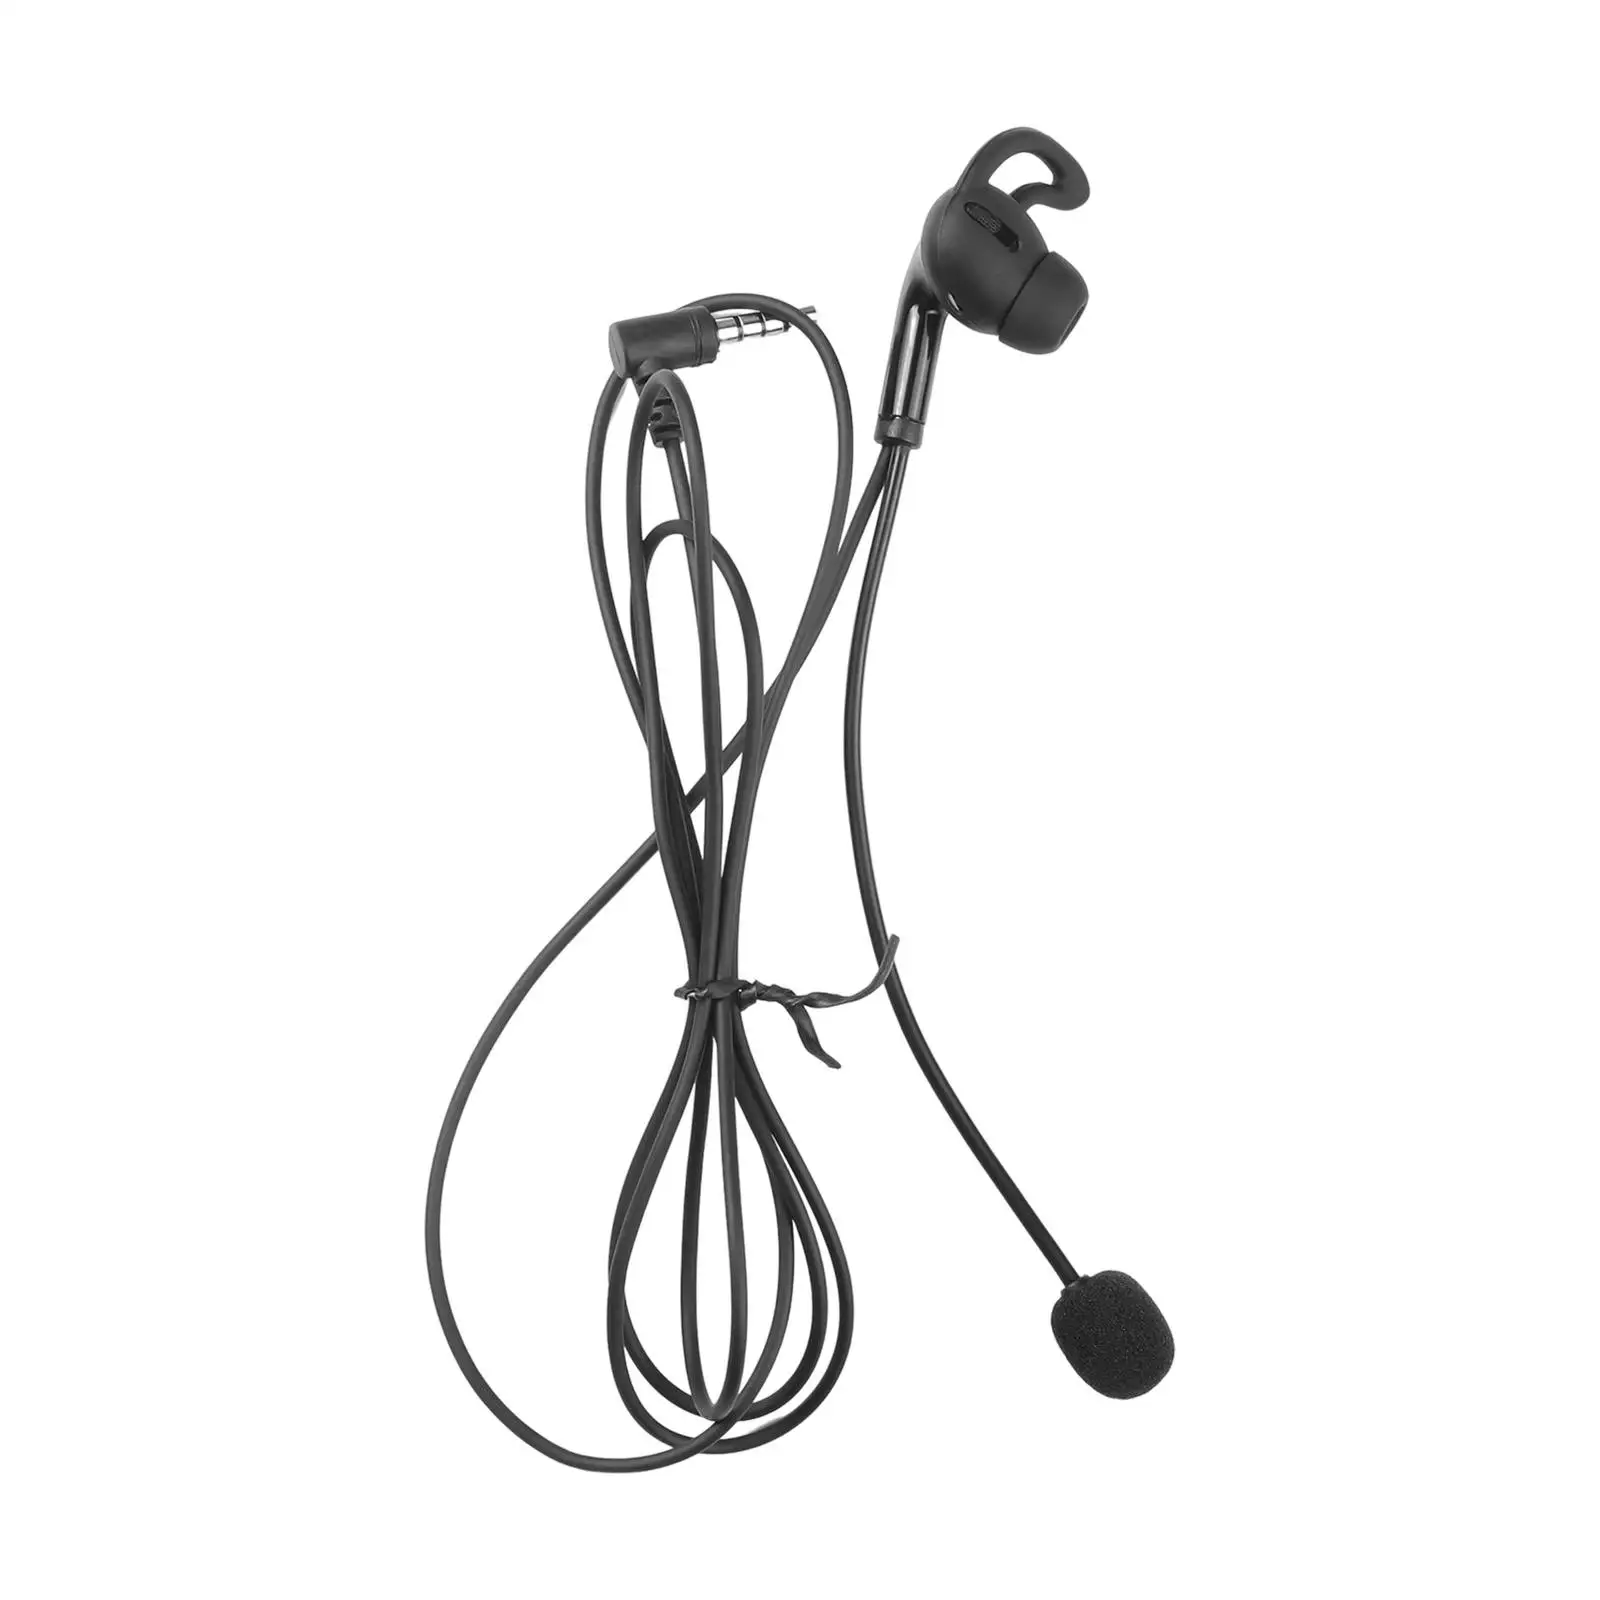 Referee Single Ear Earphone Wired Ear Mic Professional Wired Headphones Remote Portable In-Ear USB Headset for Laptop PC Sports